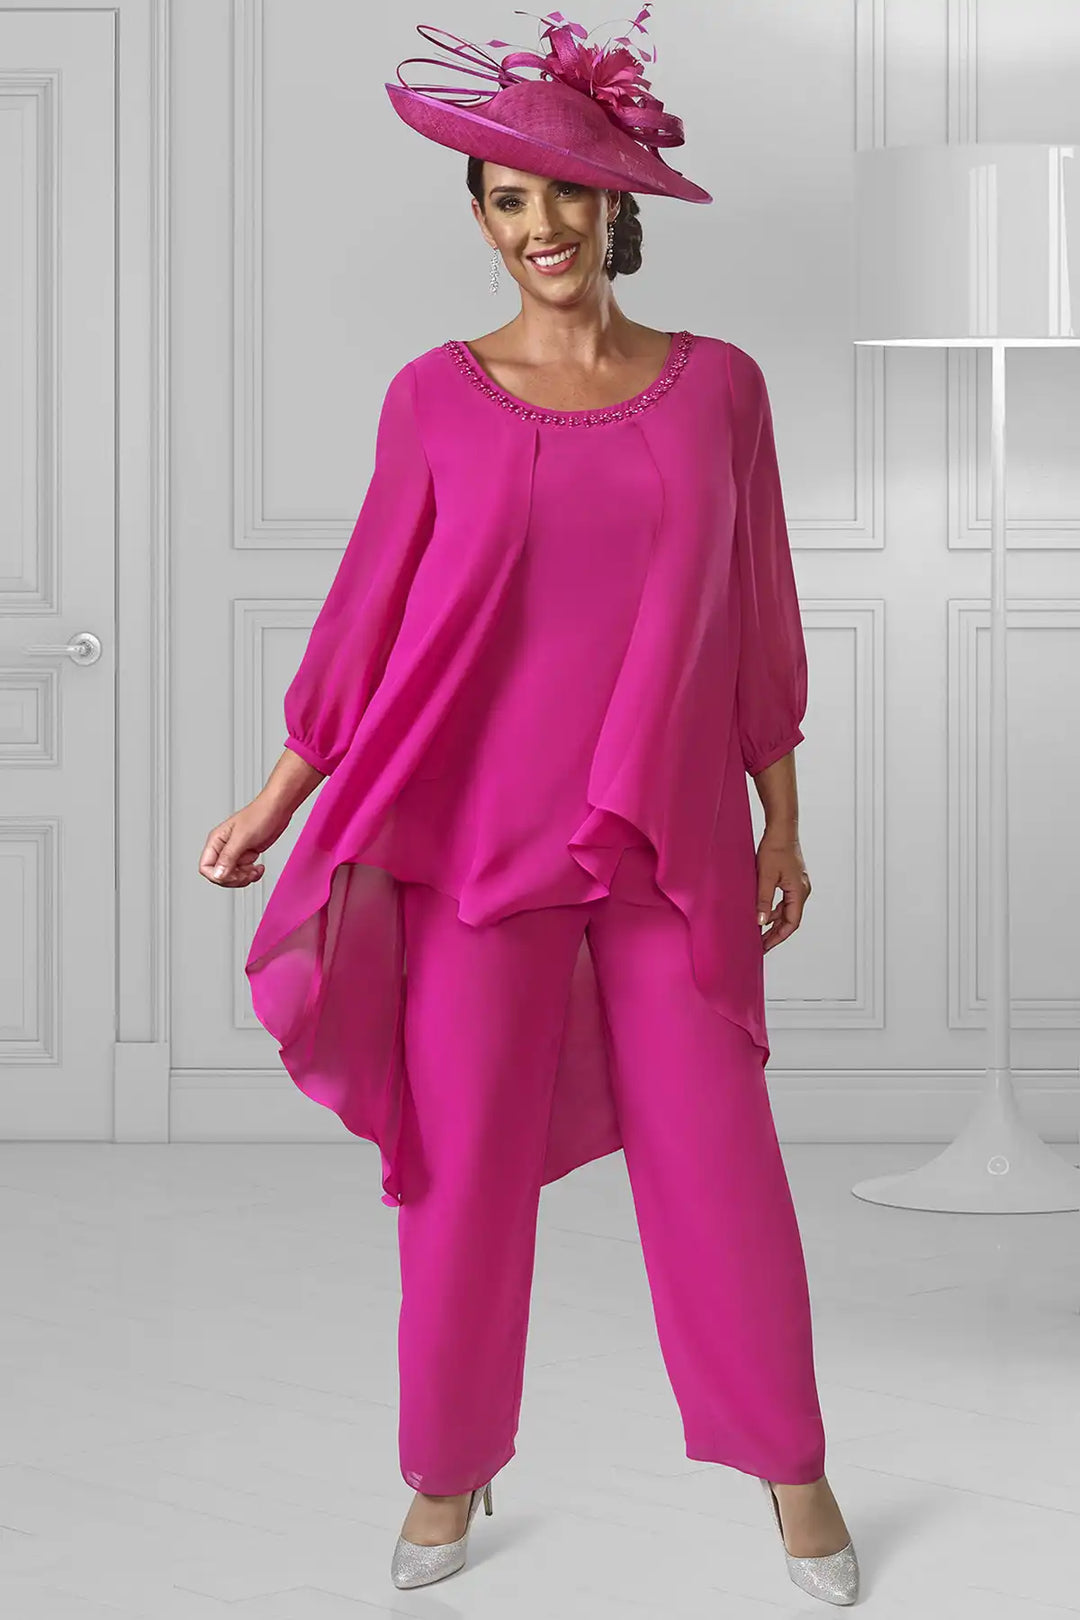 Woman wearing a Dressed Up by Veromia DU597E two-piece outfit featuring a flowy chiffon top with elegant sleeves, a crystal-embellished neckline, and an asymmetrical hemline, paired with tailored crepe trousers.